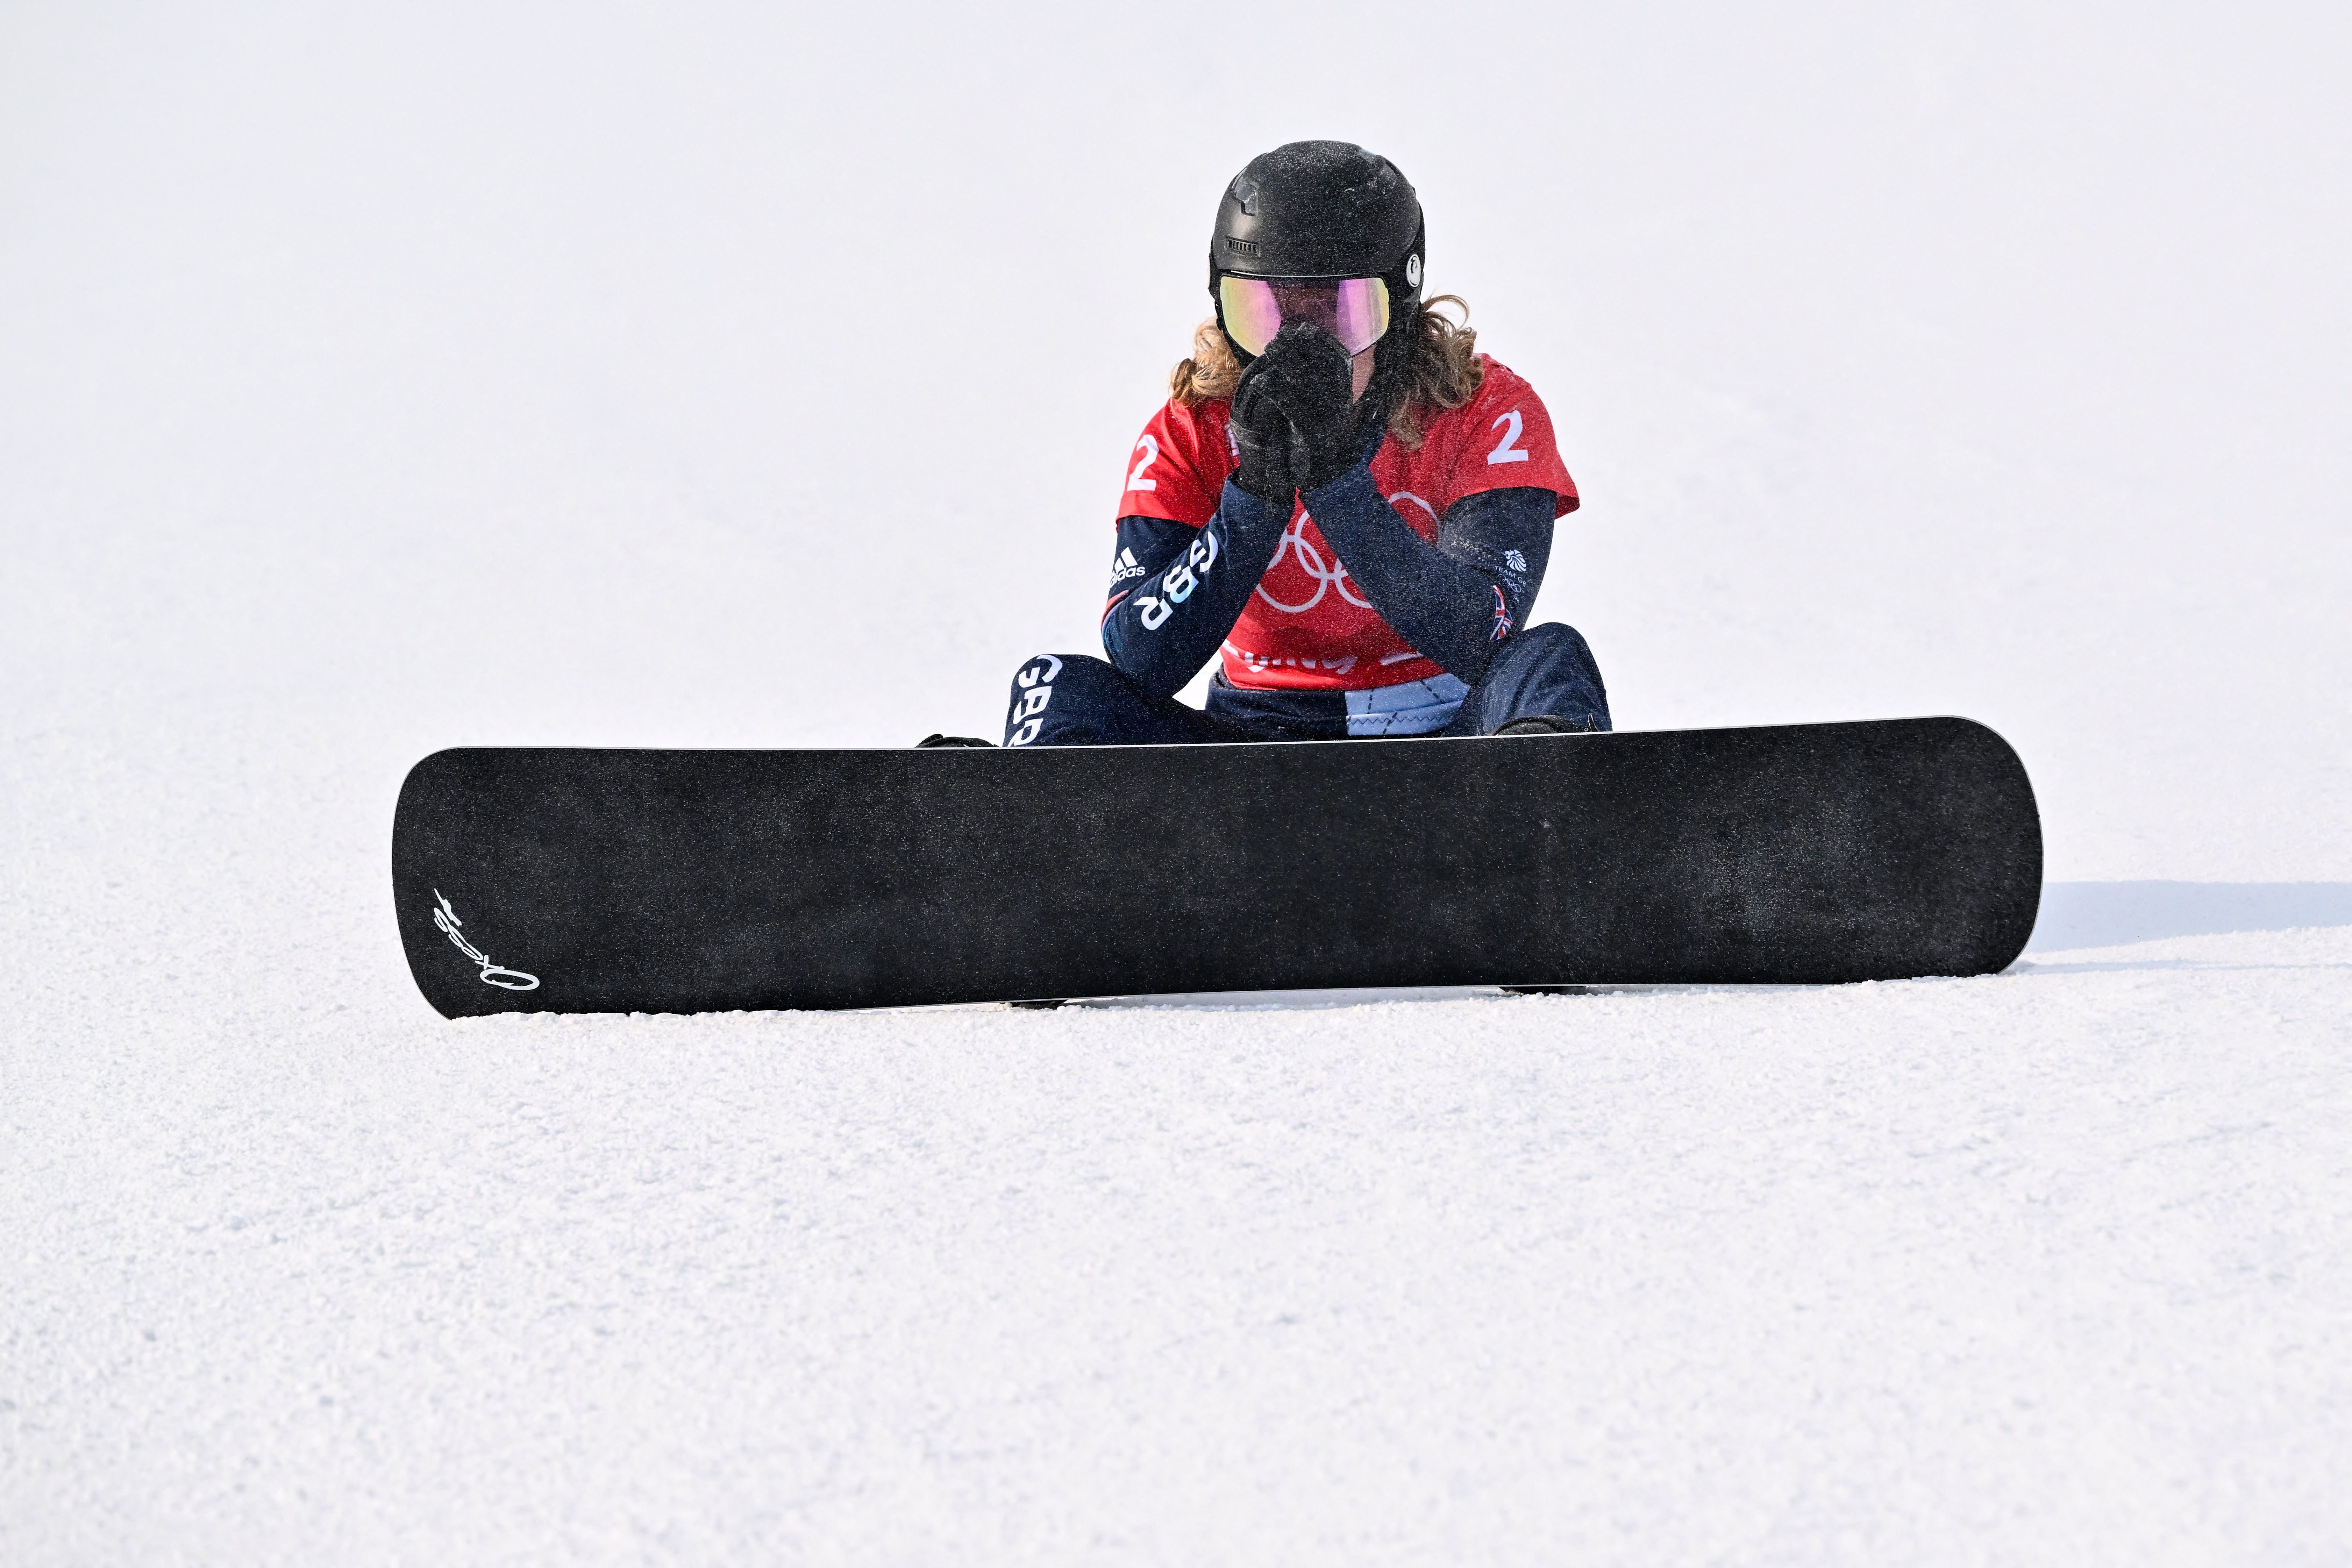 The 26-year-old came in as a favourite for a medal in the snowboard cross